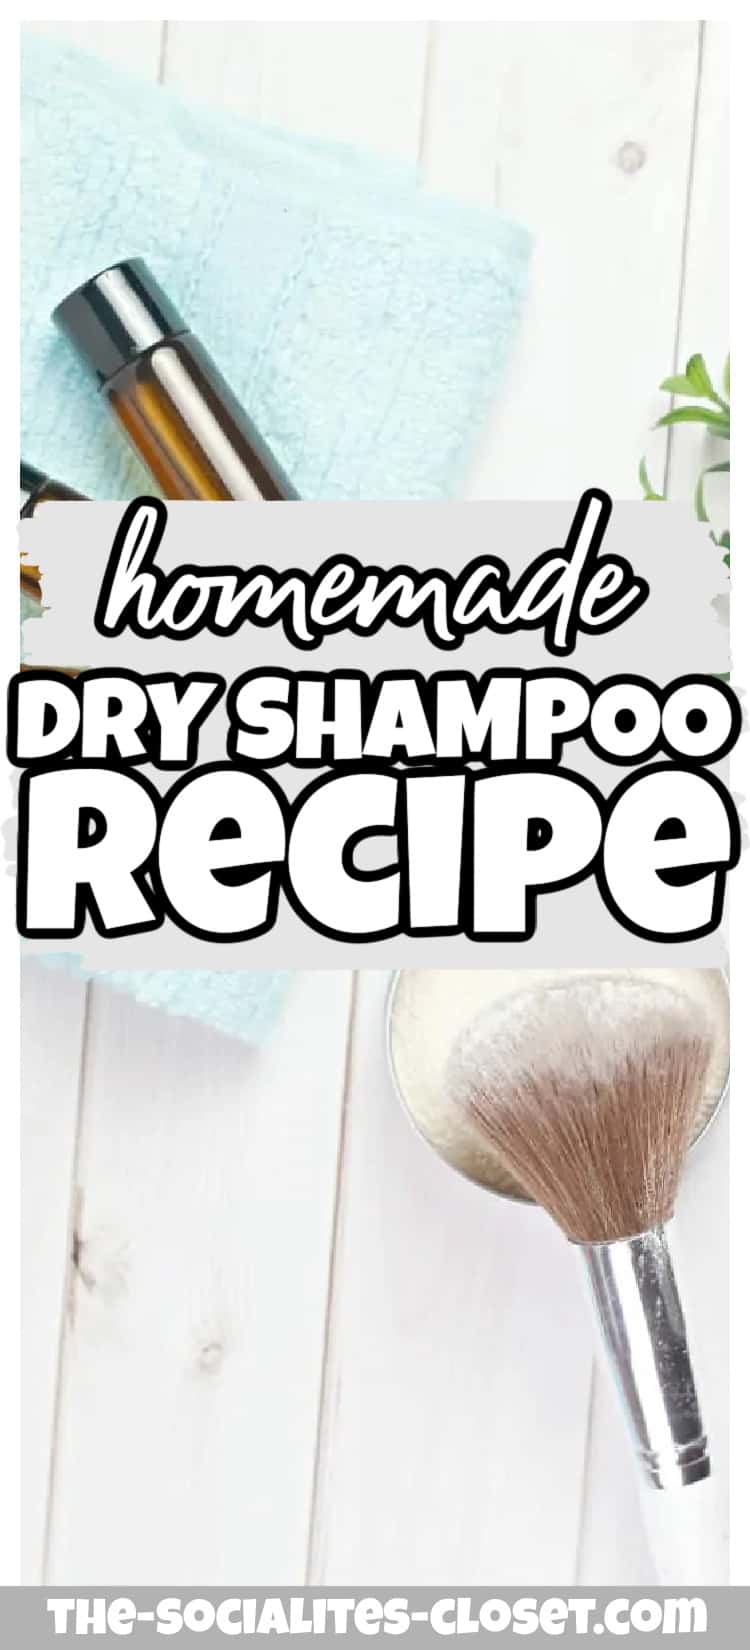 You won't believe how easy it is to make this homemade dry shampoo for any hair color. There are days that I don't really need to wash my hair. But, I do want to freshen it up a bit and add fullness and texture. That's where this DIY dry shampoo comes in handy.